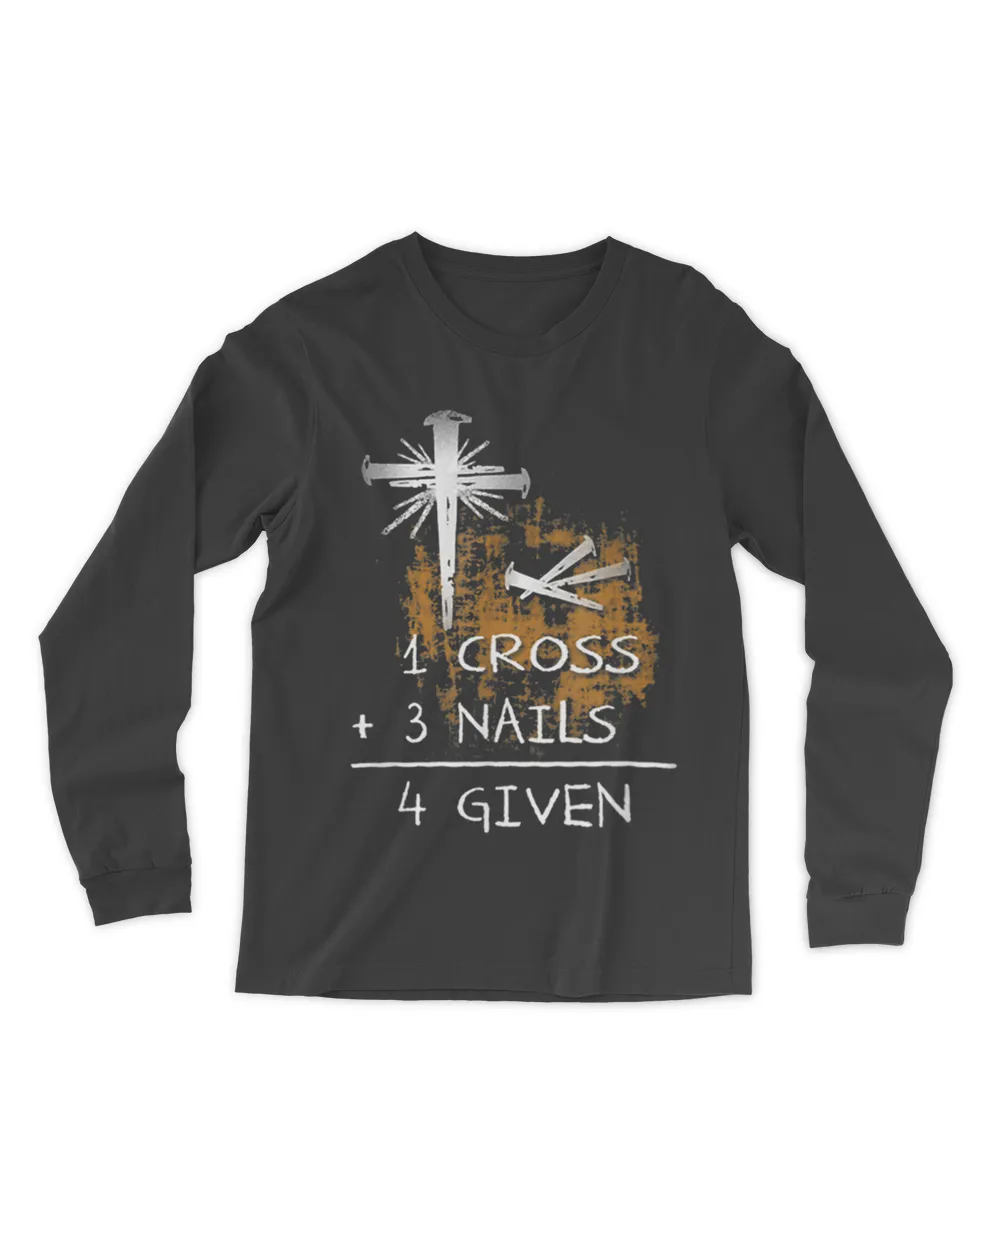 got-faw-13 1 Cross 3 Nails 4 Given